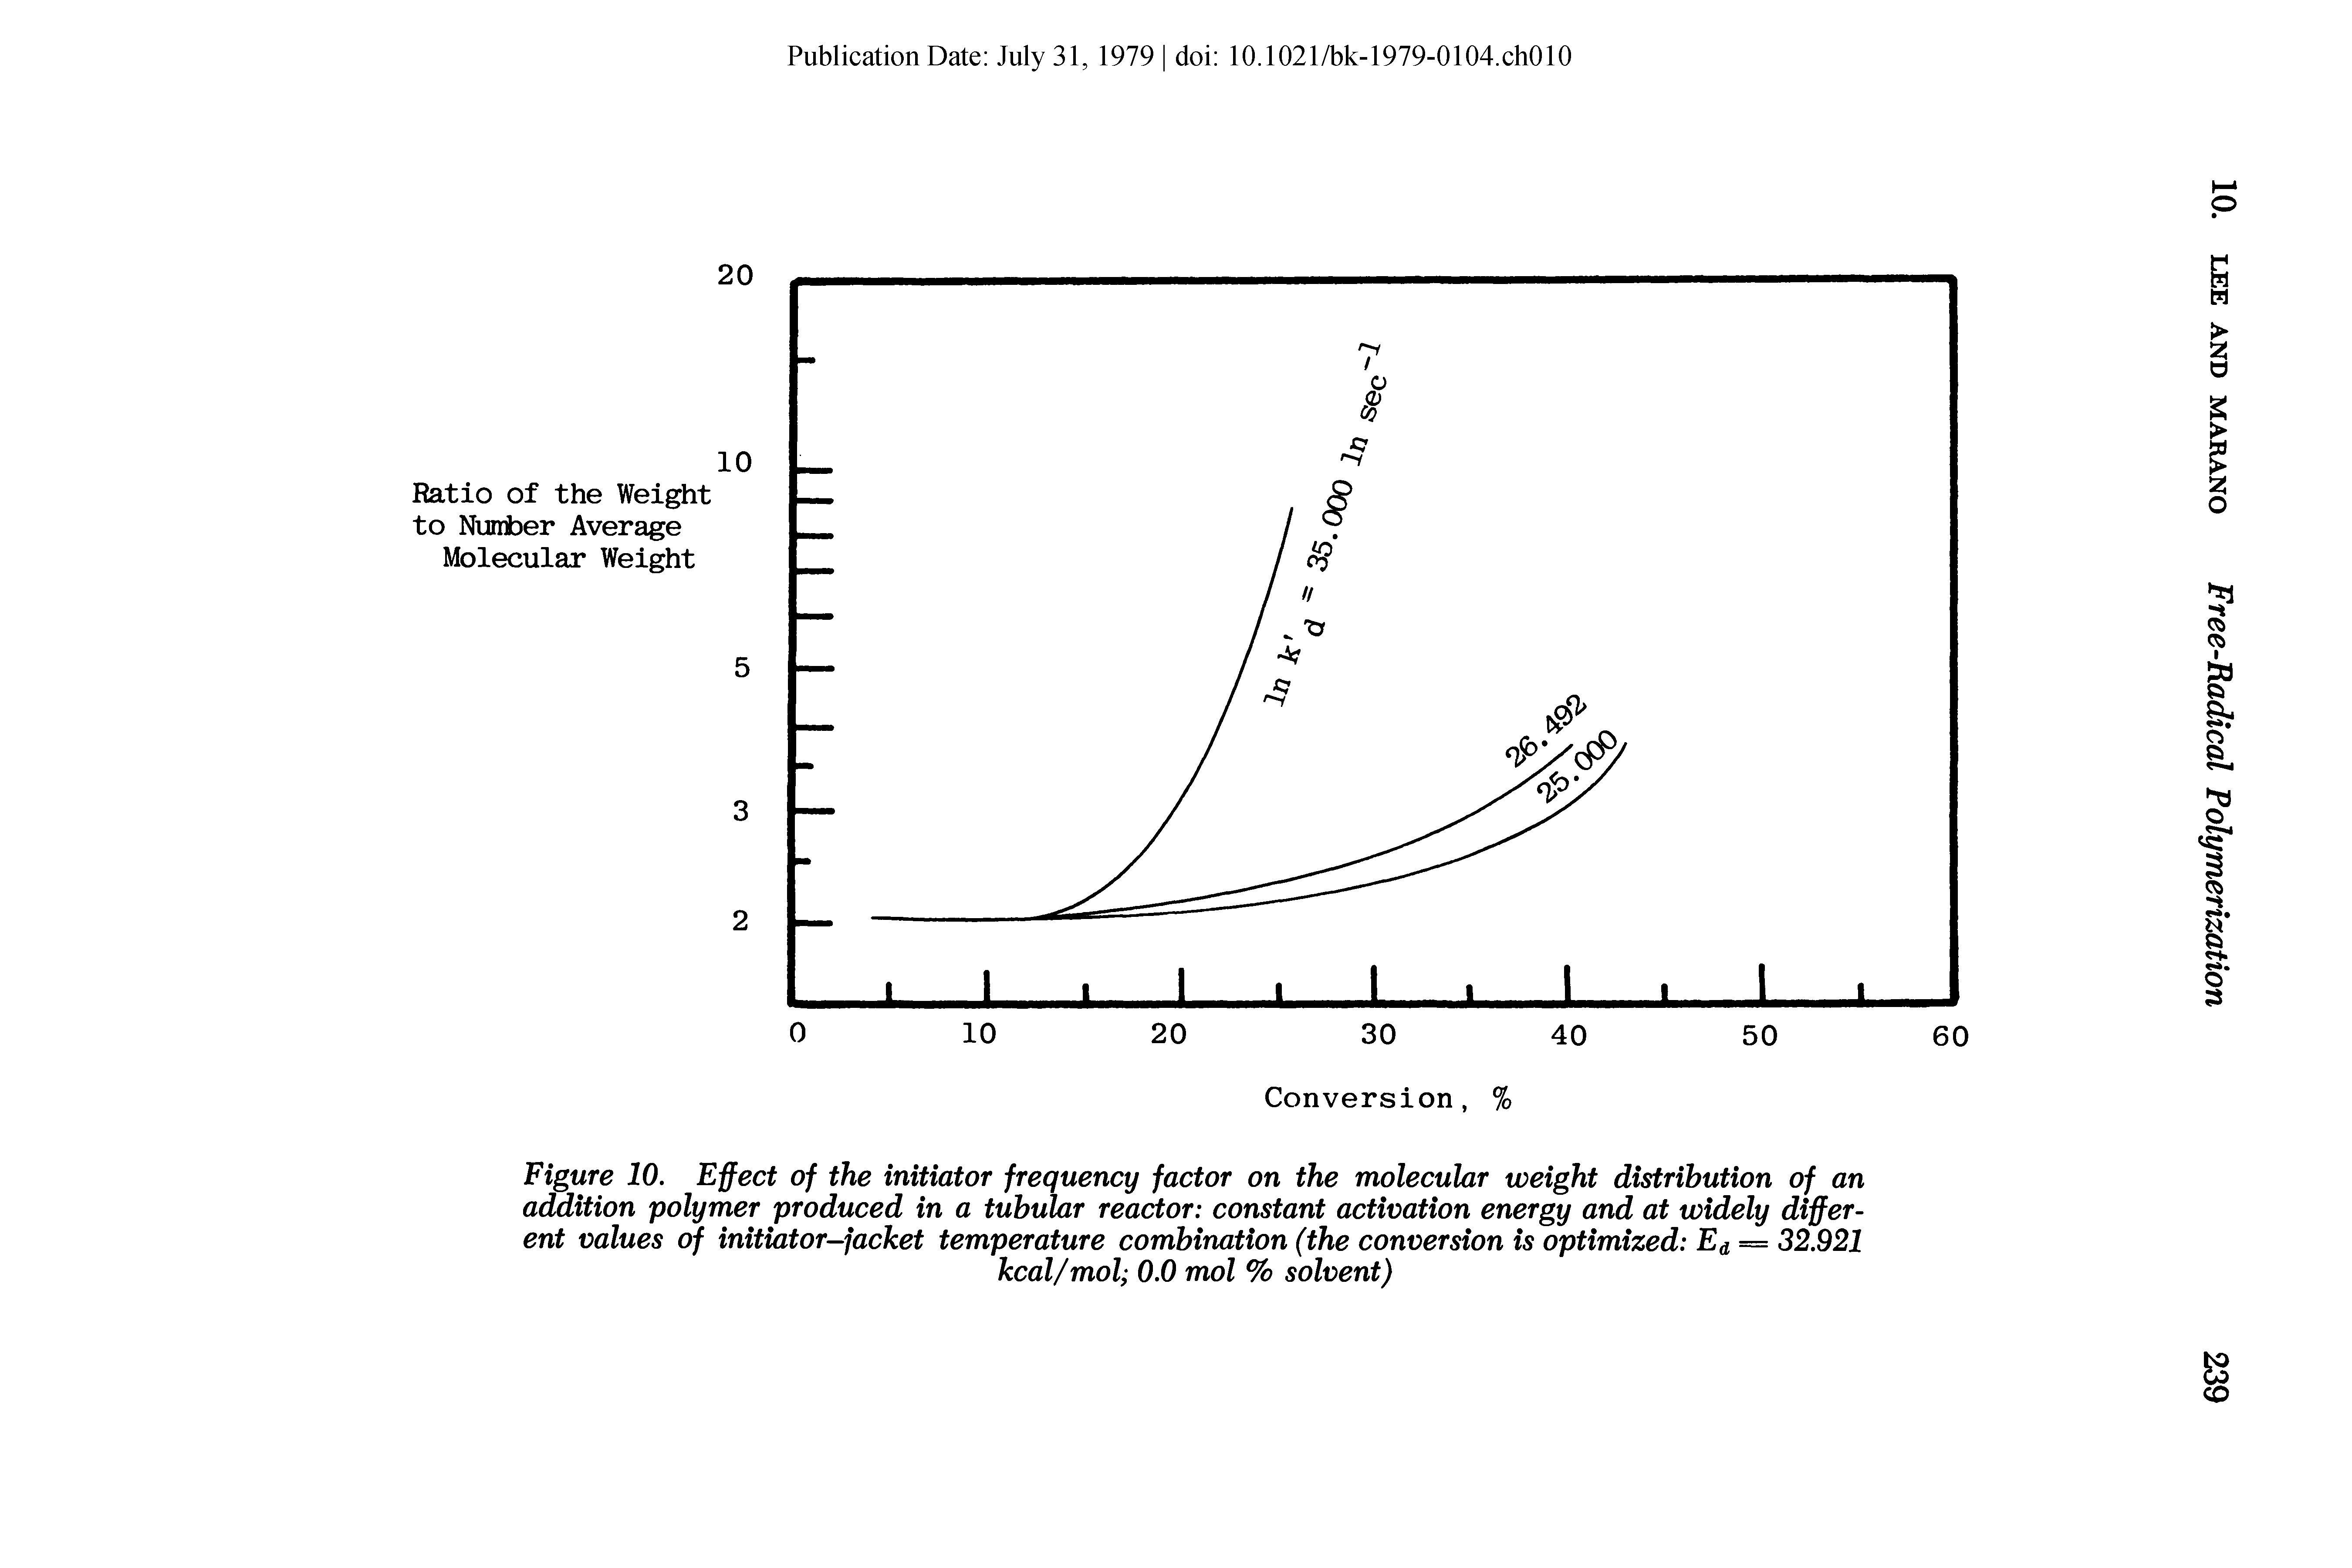 Figure 10. Effect of the initiator frequency factor on the molecular weight distribution of an addition polymer produced in a tubular reactor constant activation energy and at widely different values of initiator-jacket temperature combination (the conversion is optimized Ea = 32.921...